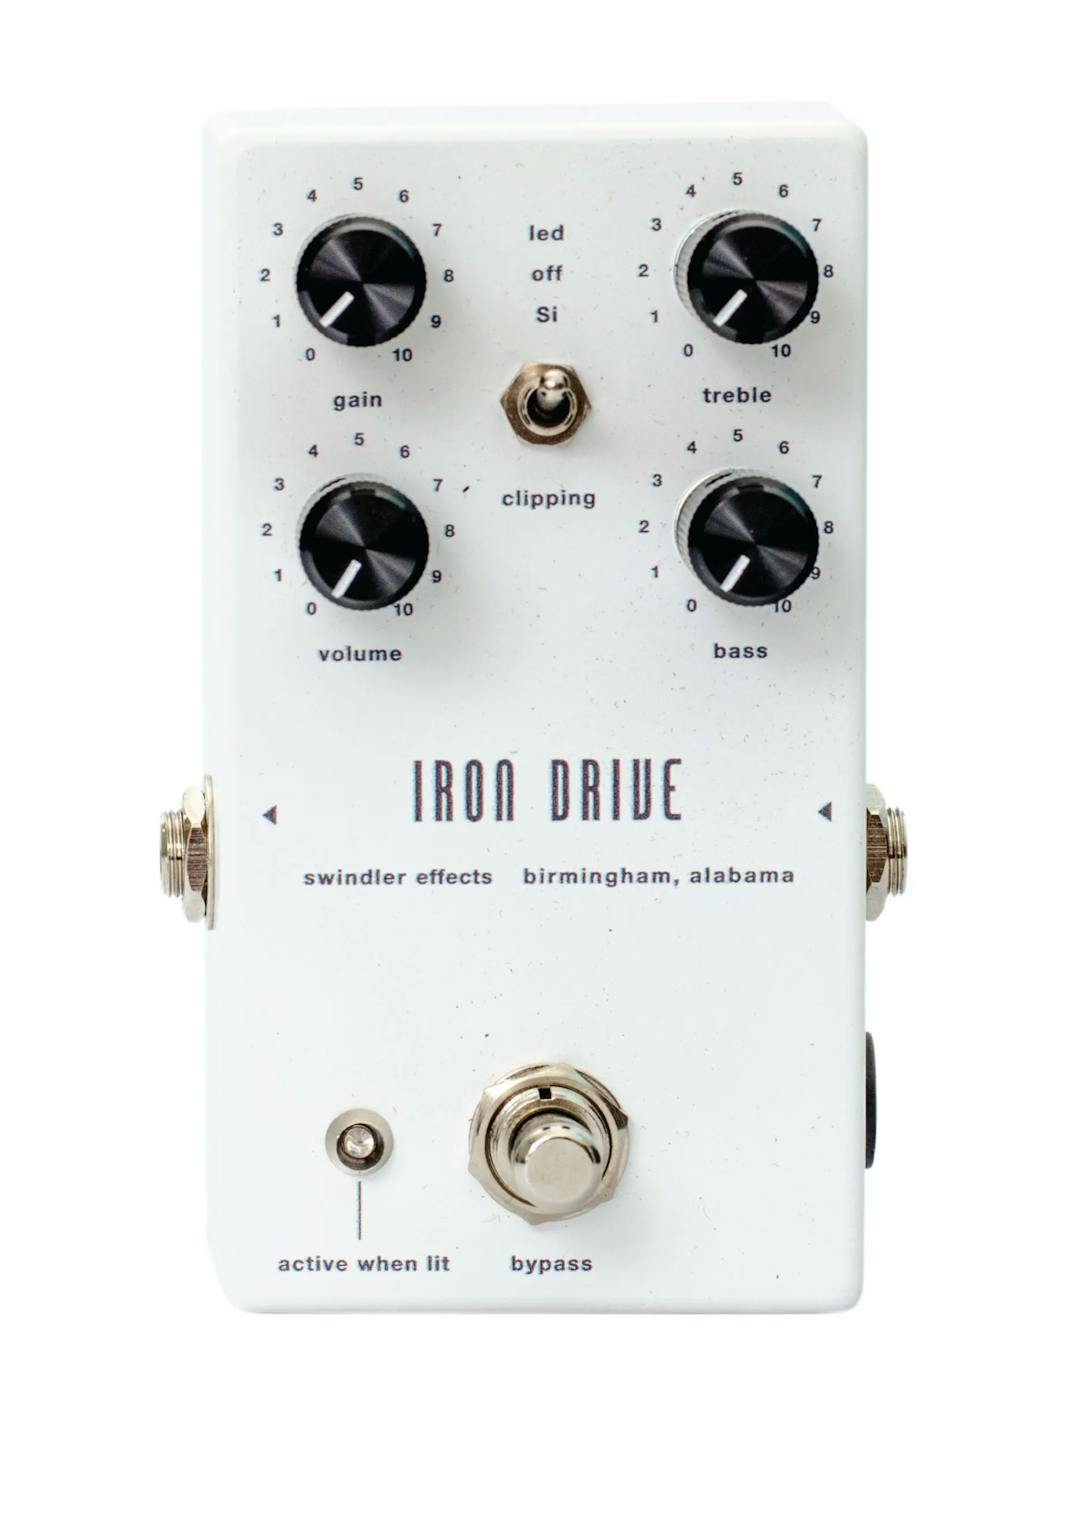 Iron Drive Guitar Pedal By Swindler Effects